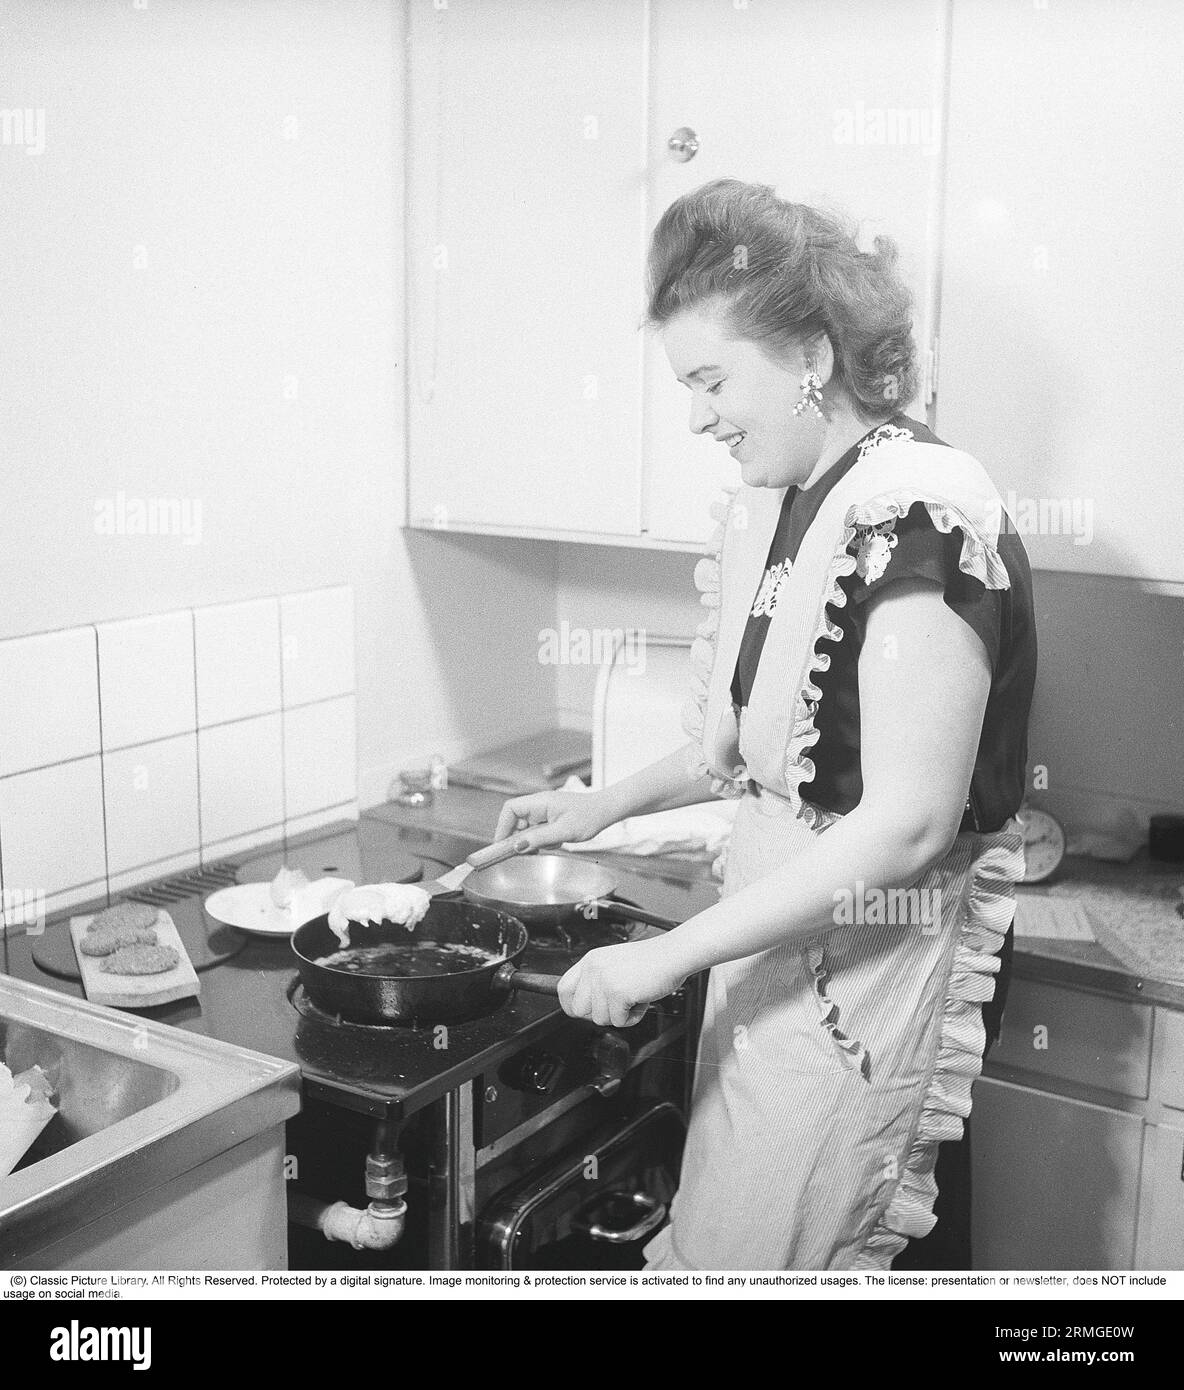 In the kitchen 1940s. Interior of a kitchen and a young woman standing at the kitchen cooker frying eggs in the frying pan. She is wearing a apron. Sweden 1947. Kristoffersson ref AB3-2 Stock Photo